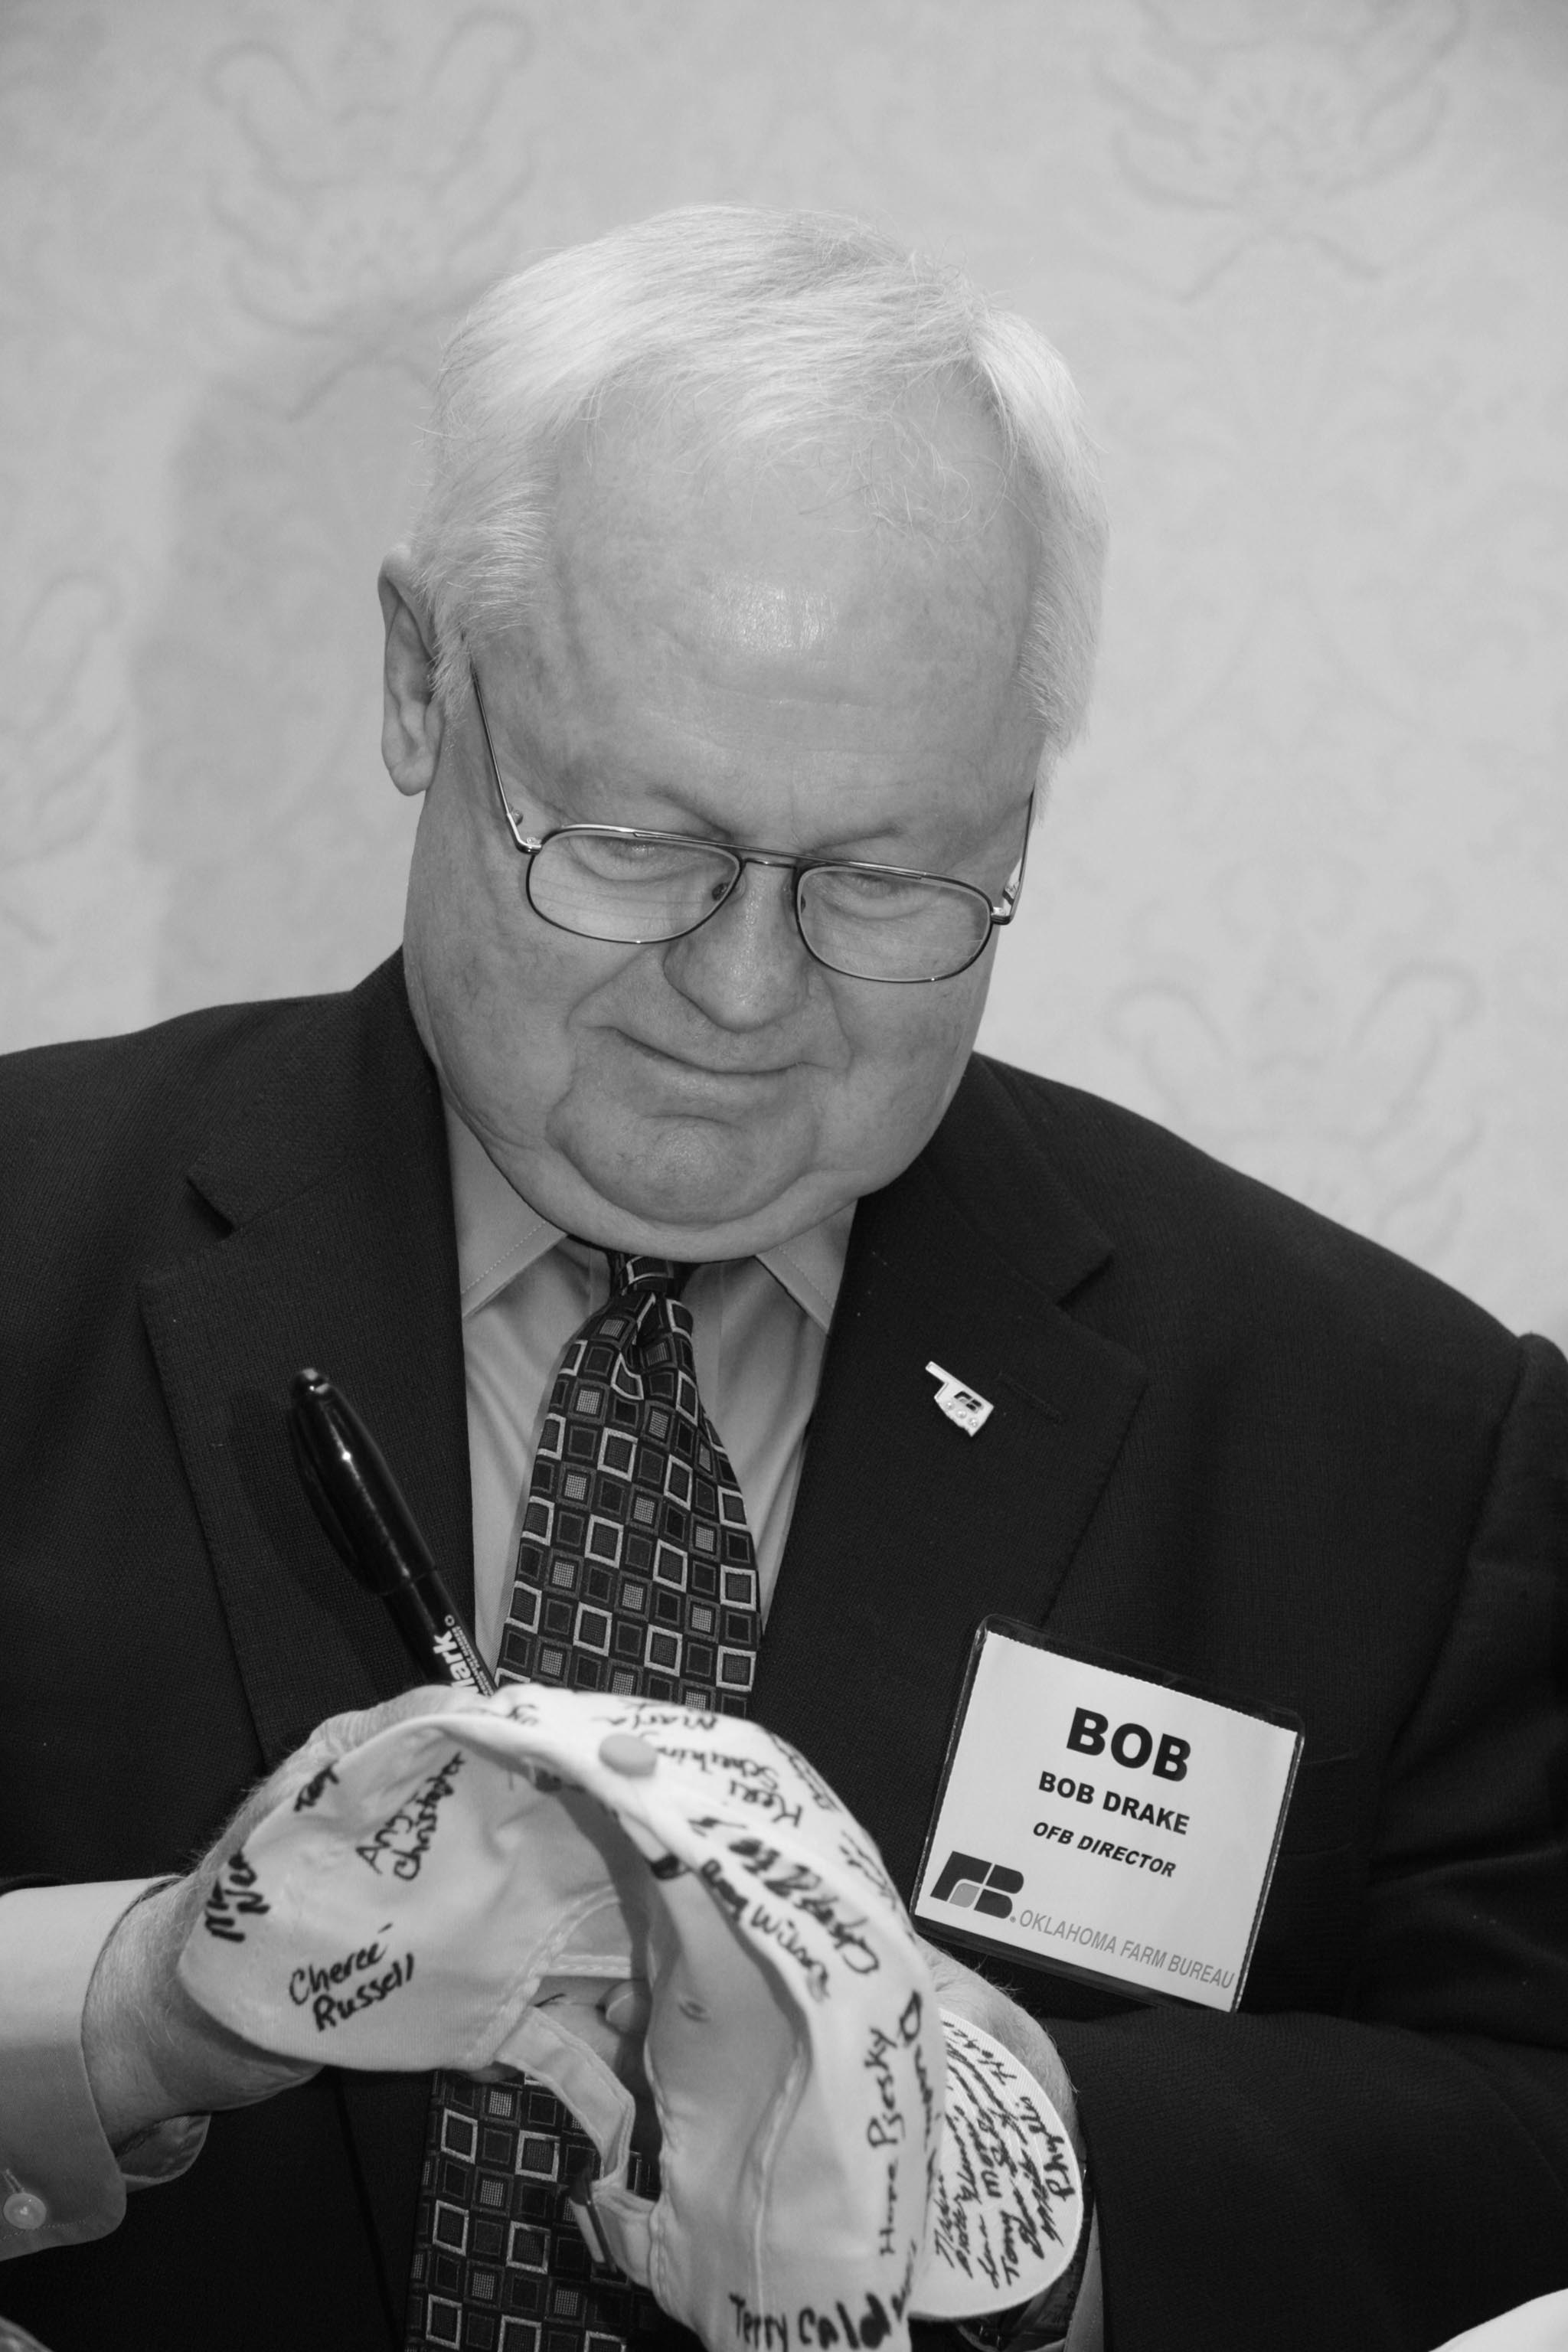 Oklahoma Farm Bureau Board Member Bob Drake of Murray County signs an OKFB cap that was passed around to members at the 2009 State Resolutions Committee meeting, showing support for the American Farm Bureau Federation’s “Don’t cap our future” campaign. The campaign rallied against a proposed “cap and trade” scheme of environmental controls that was being proposed in Congress. Two signed caps were sent to Washington, D.C., to show OKFB support for the campaign, one of which was used on the U.S. Senate floor by Sen. Jim Inhofe during debate on the bill.